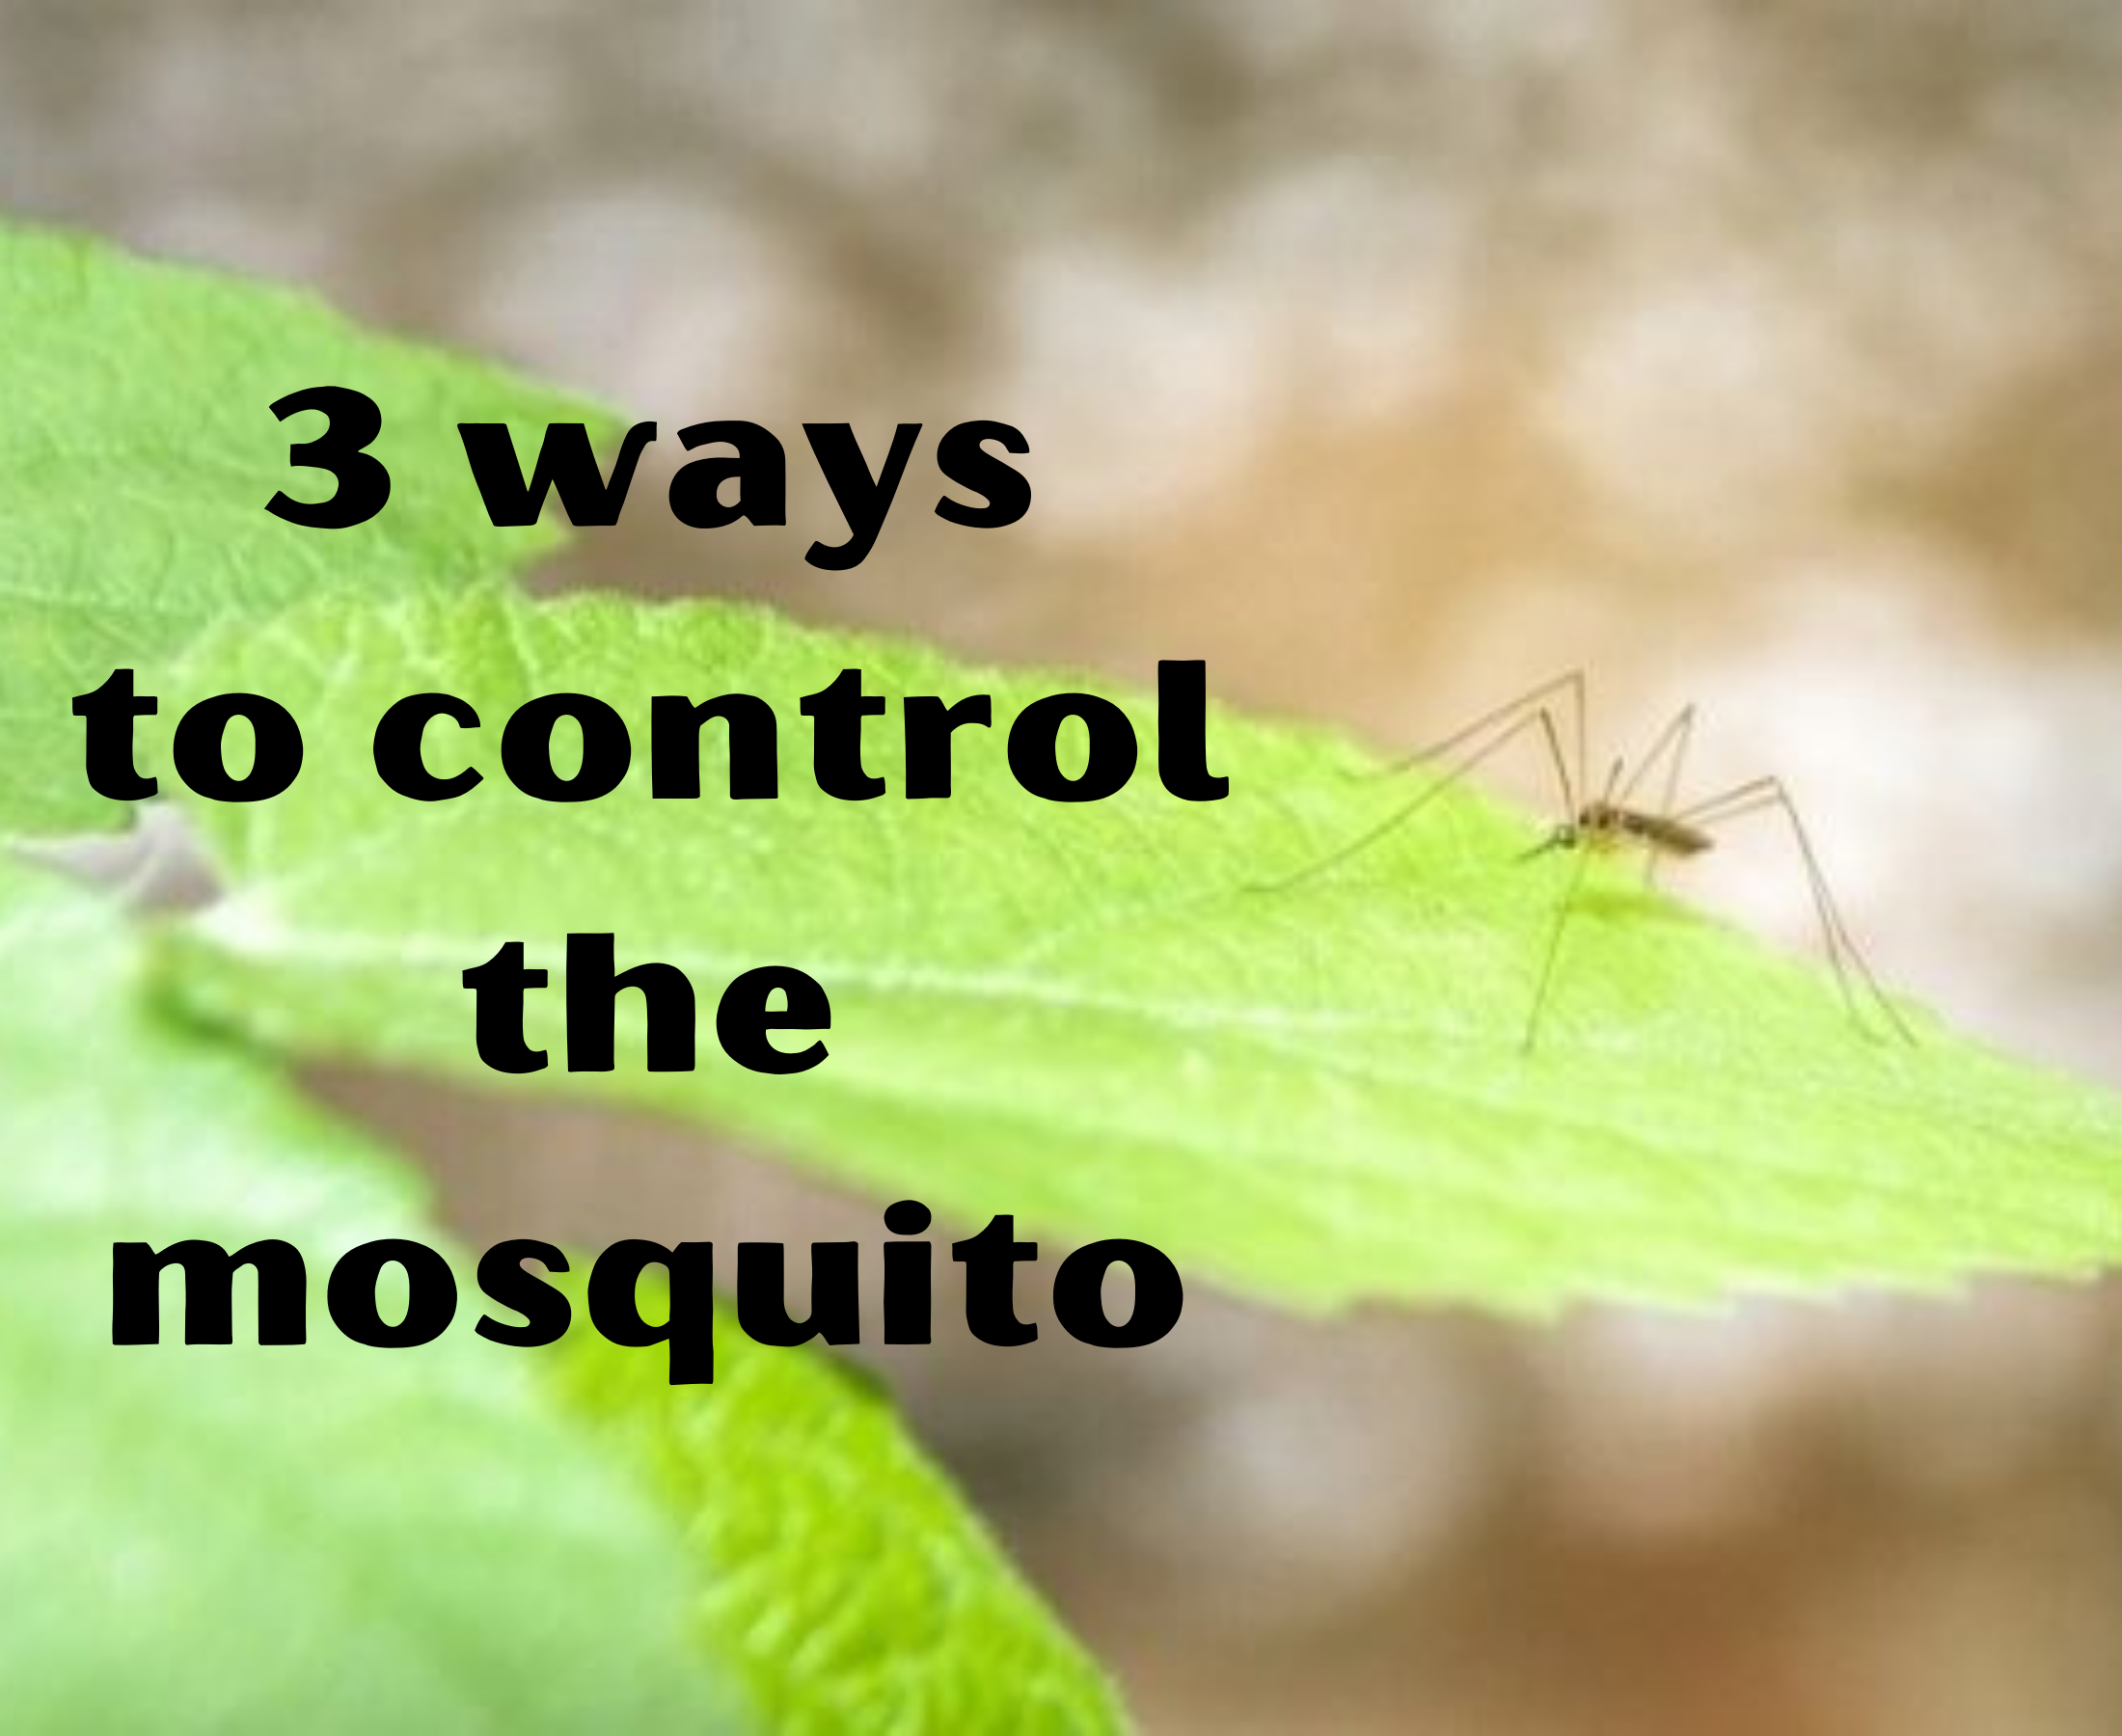 Why mosquito control is important? Effective ways to control it